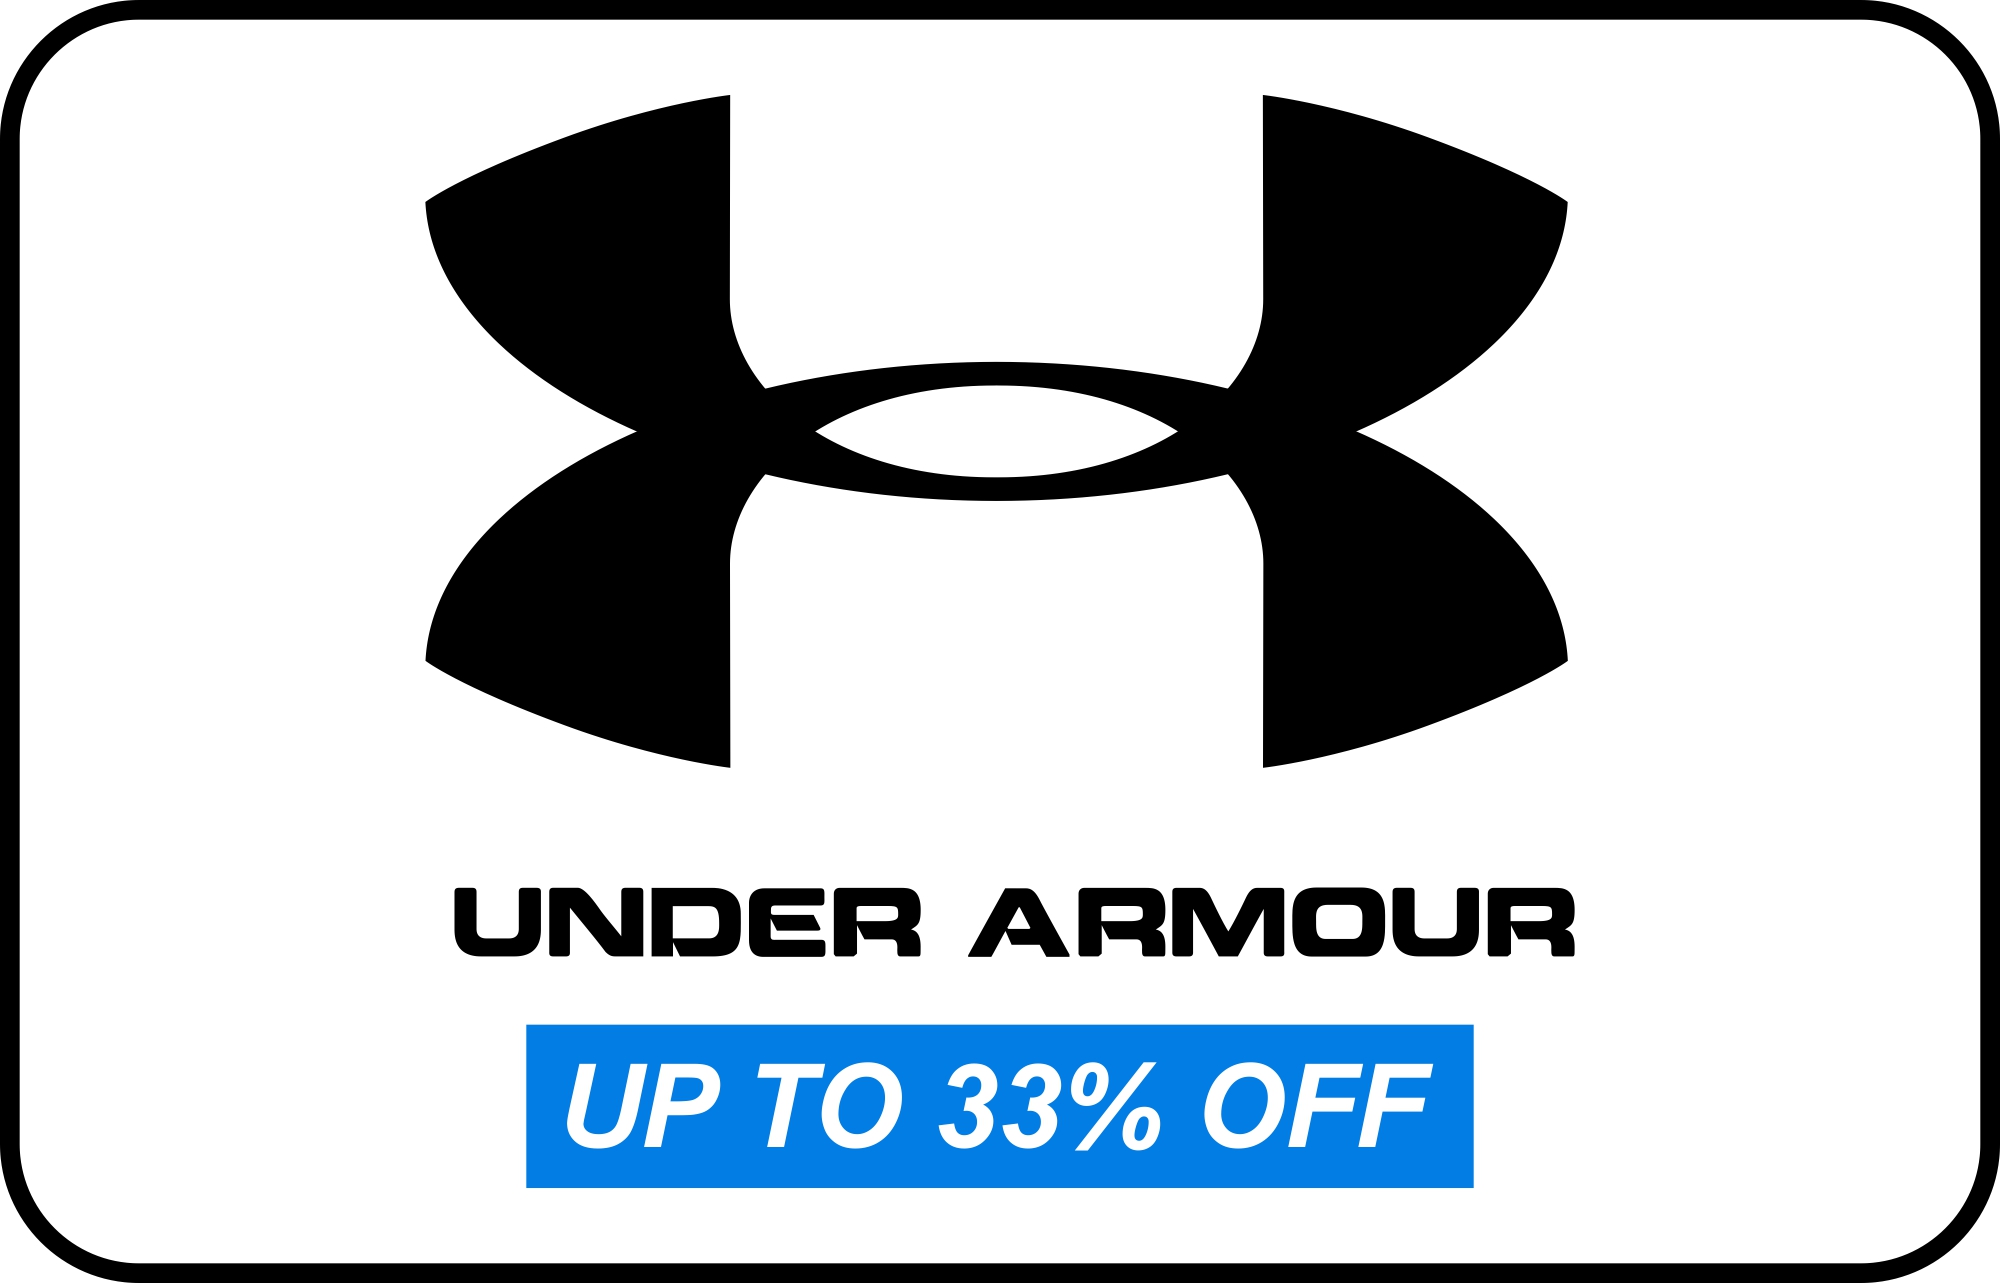 Under Armour, Up to 33% off